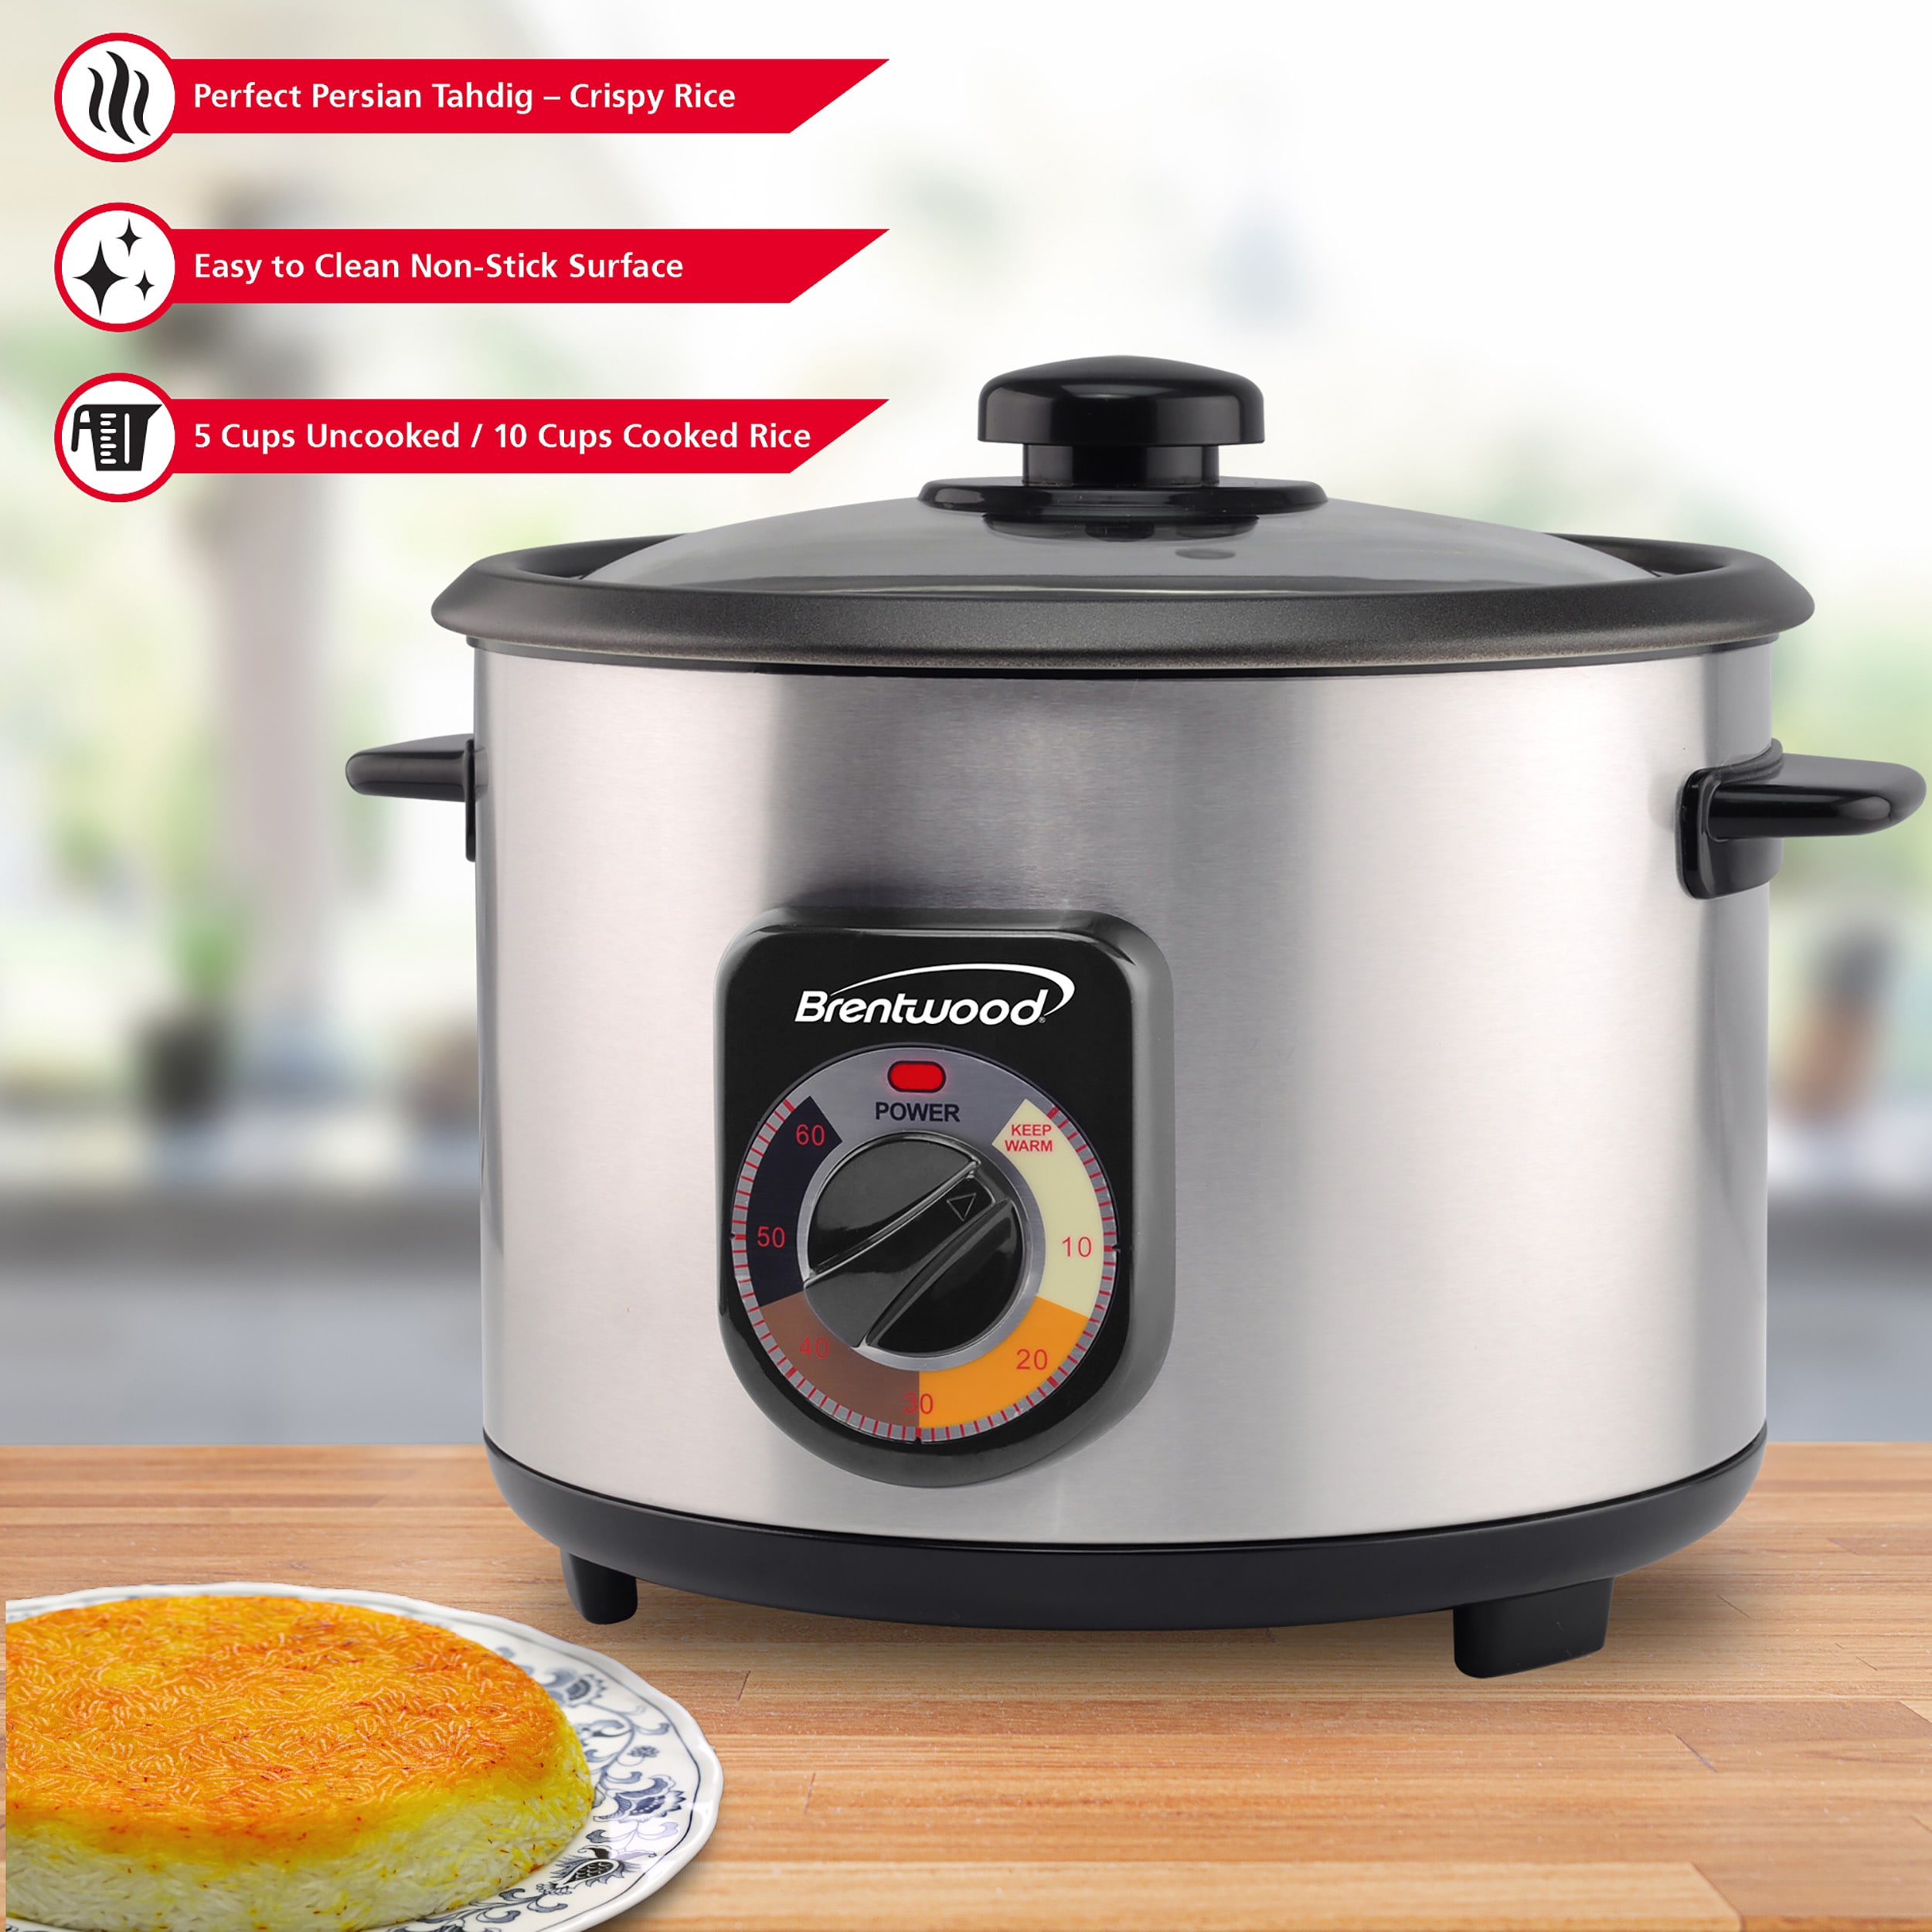 BLACK+DECKER Rice Cooker 16 Cups Cooked (8 Cups Uncooked) with Steaming  Basket, Removable Non-Stick Bowl, White